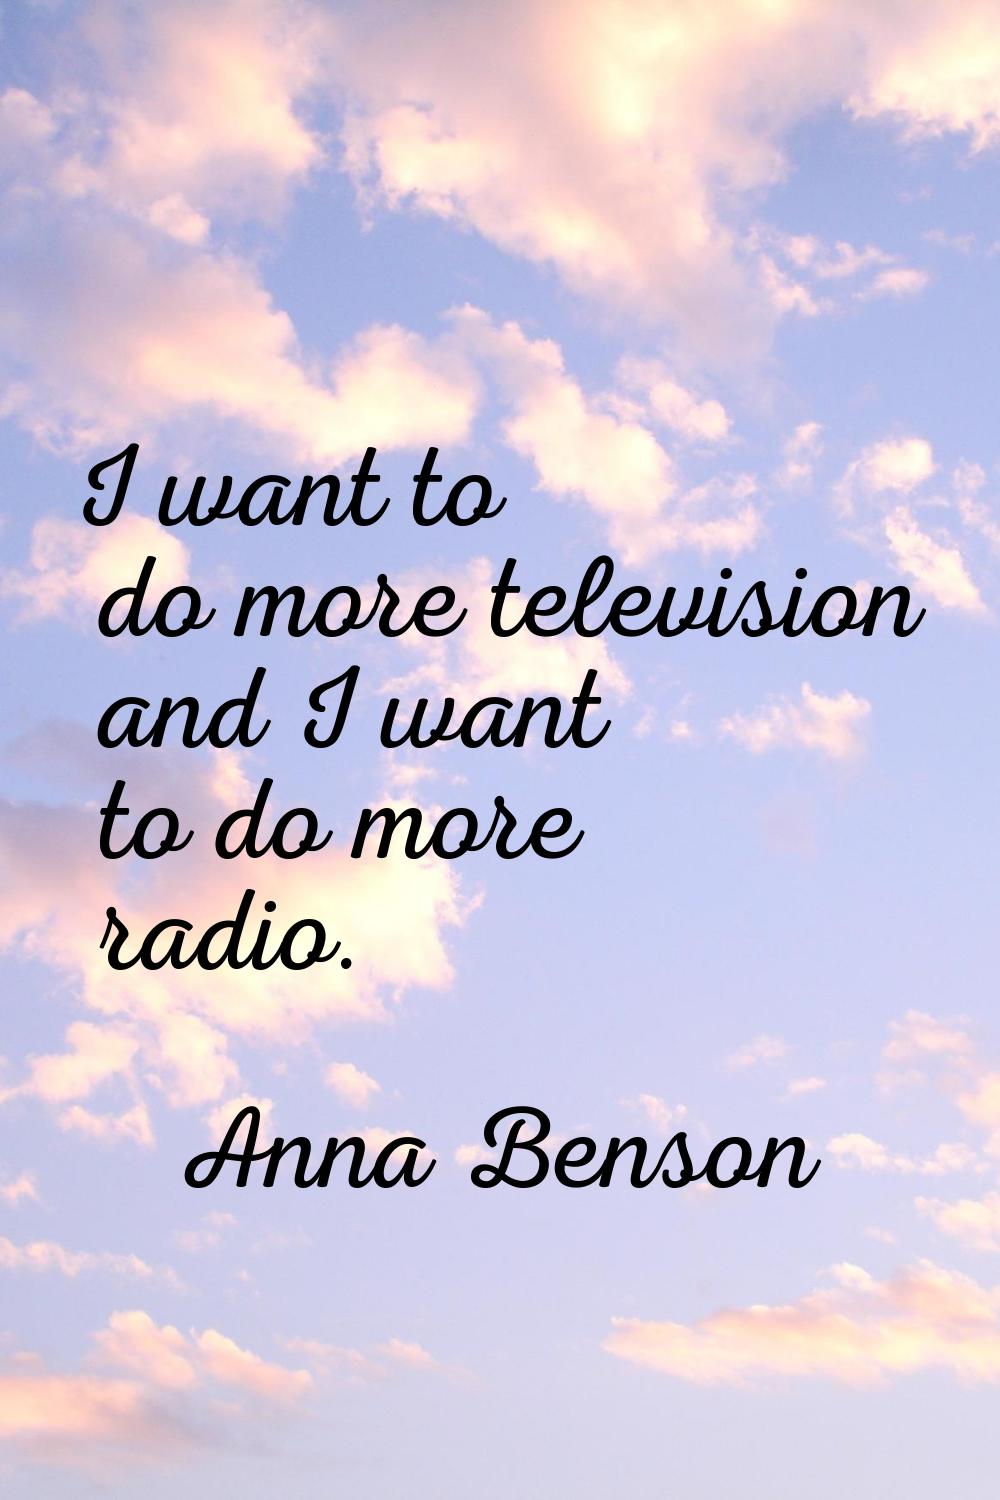 I want to do more television and I want to do more radio.